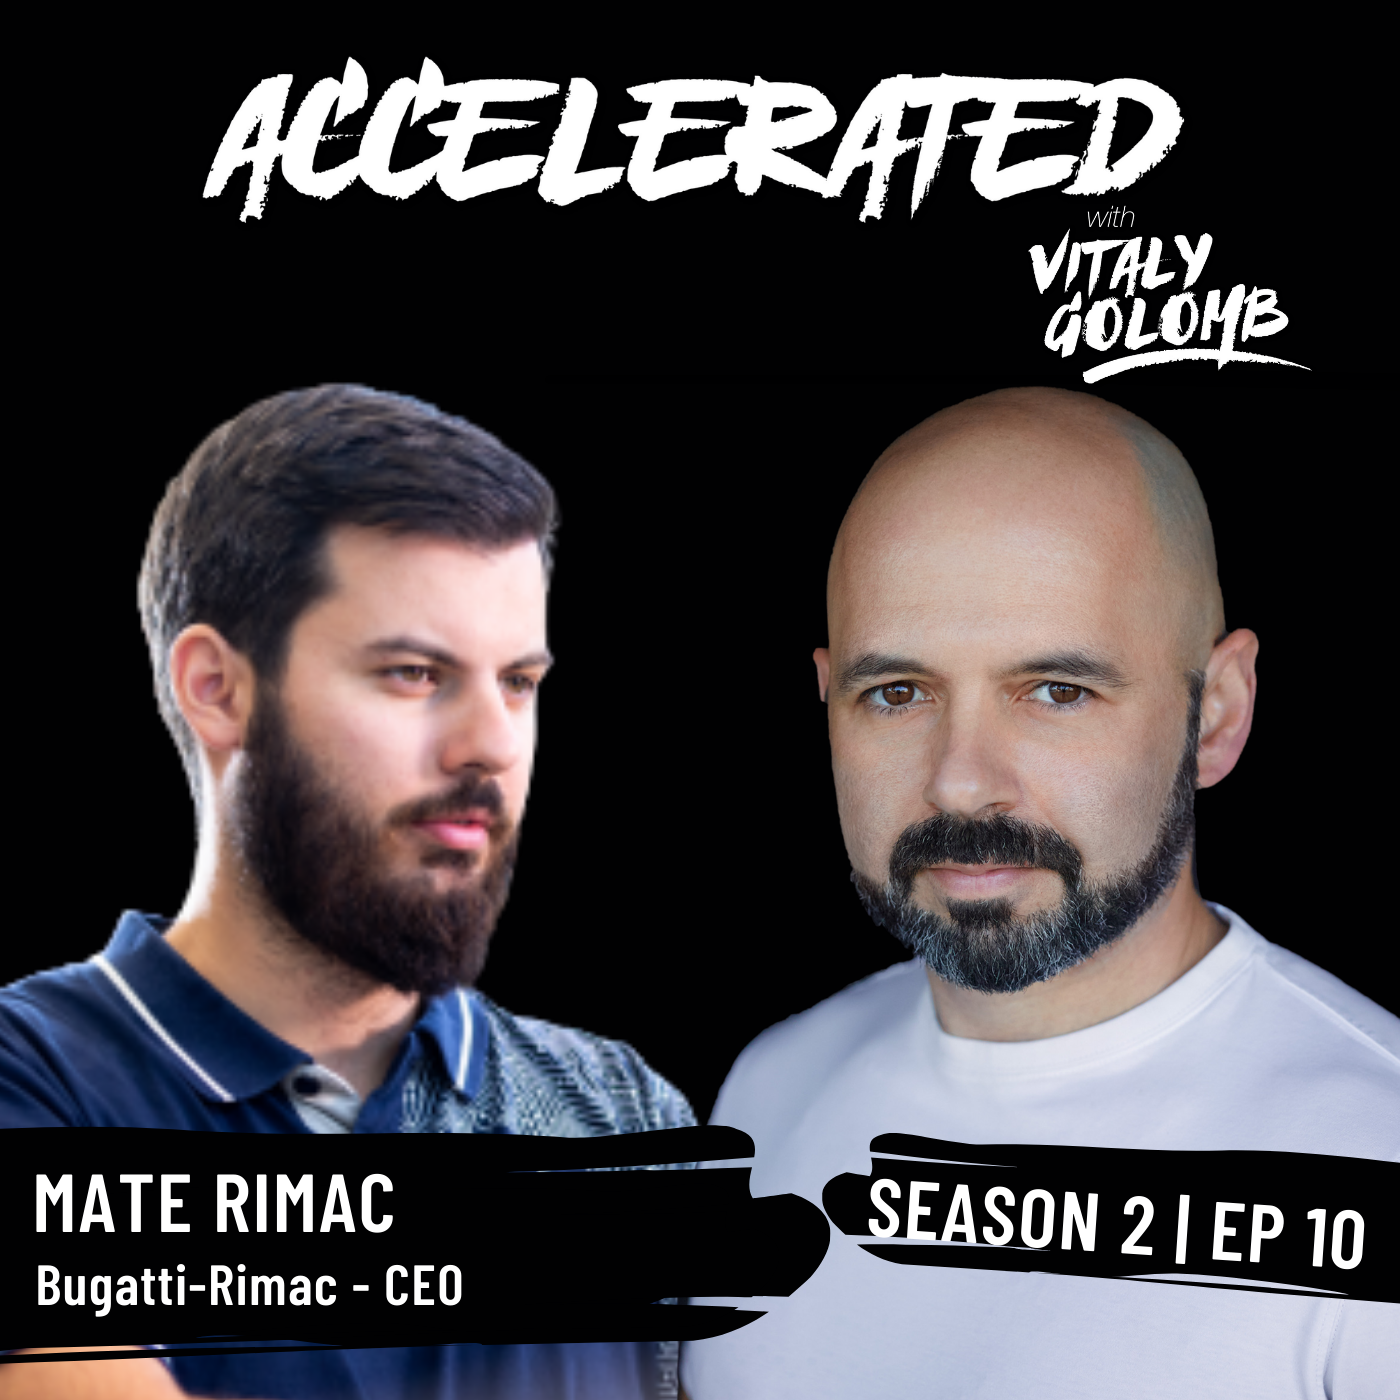 Artwork for podcast Accelerated with Vitaly Golomb